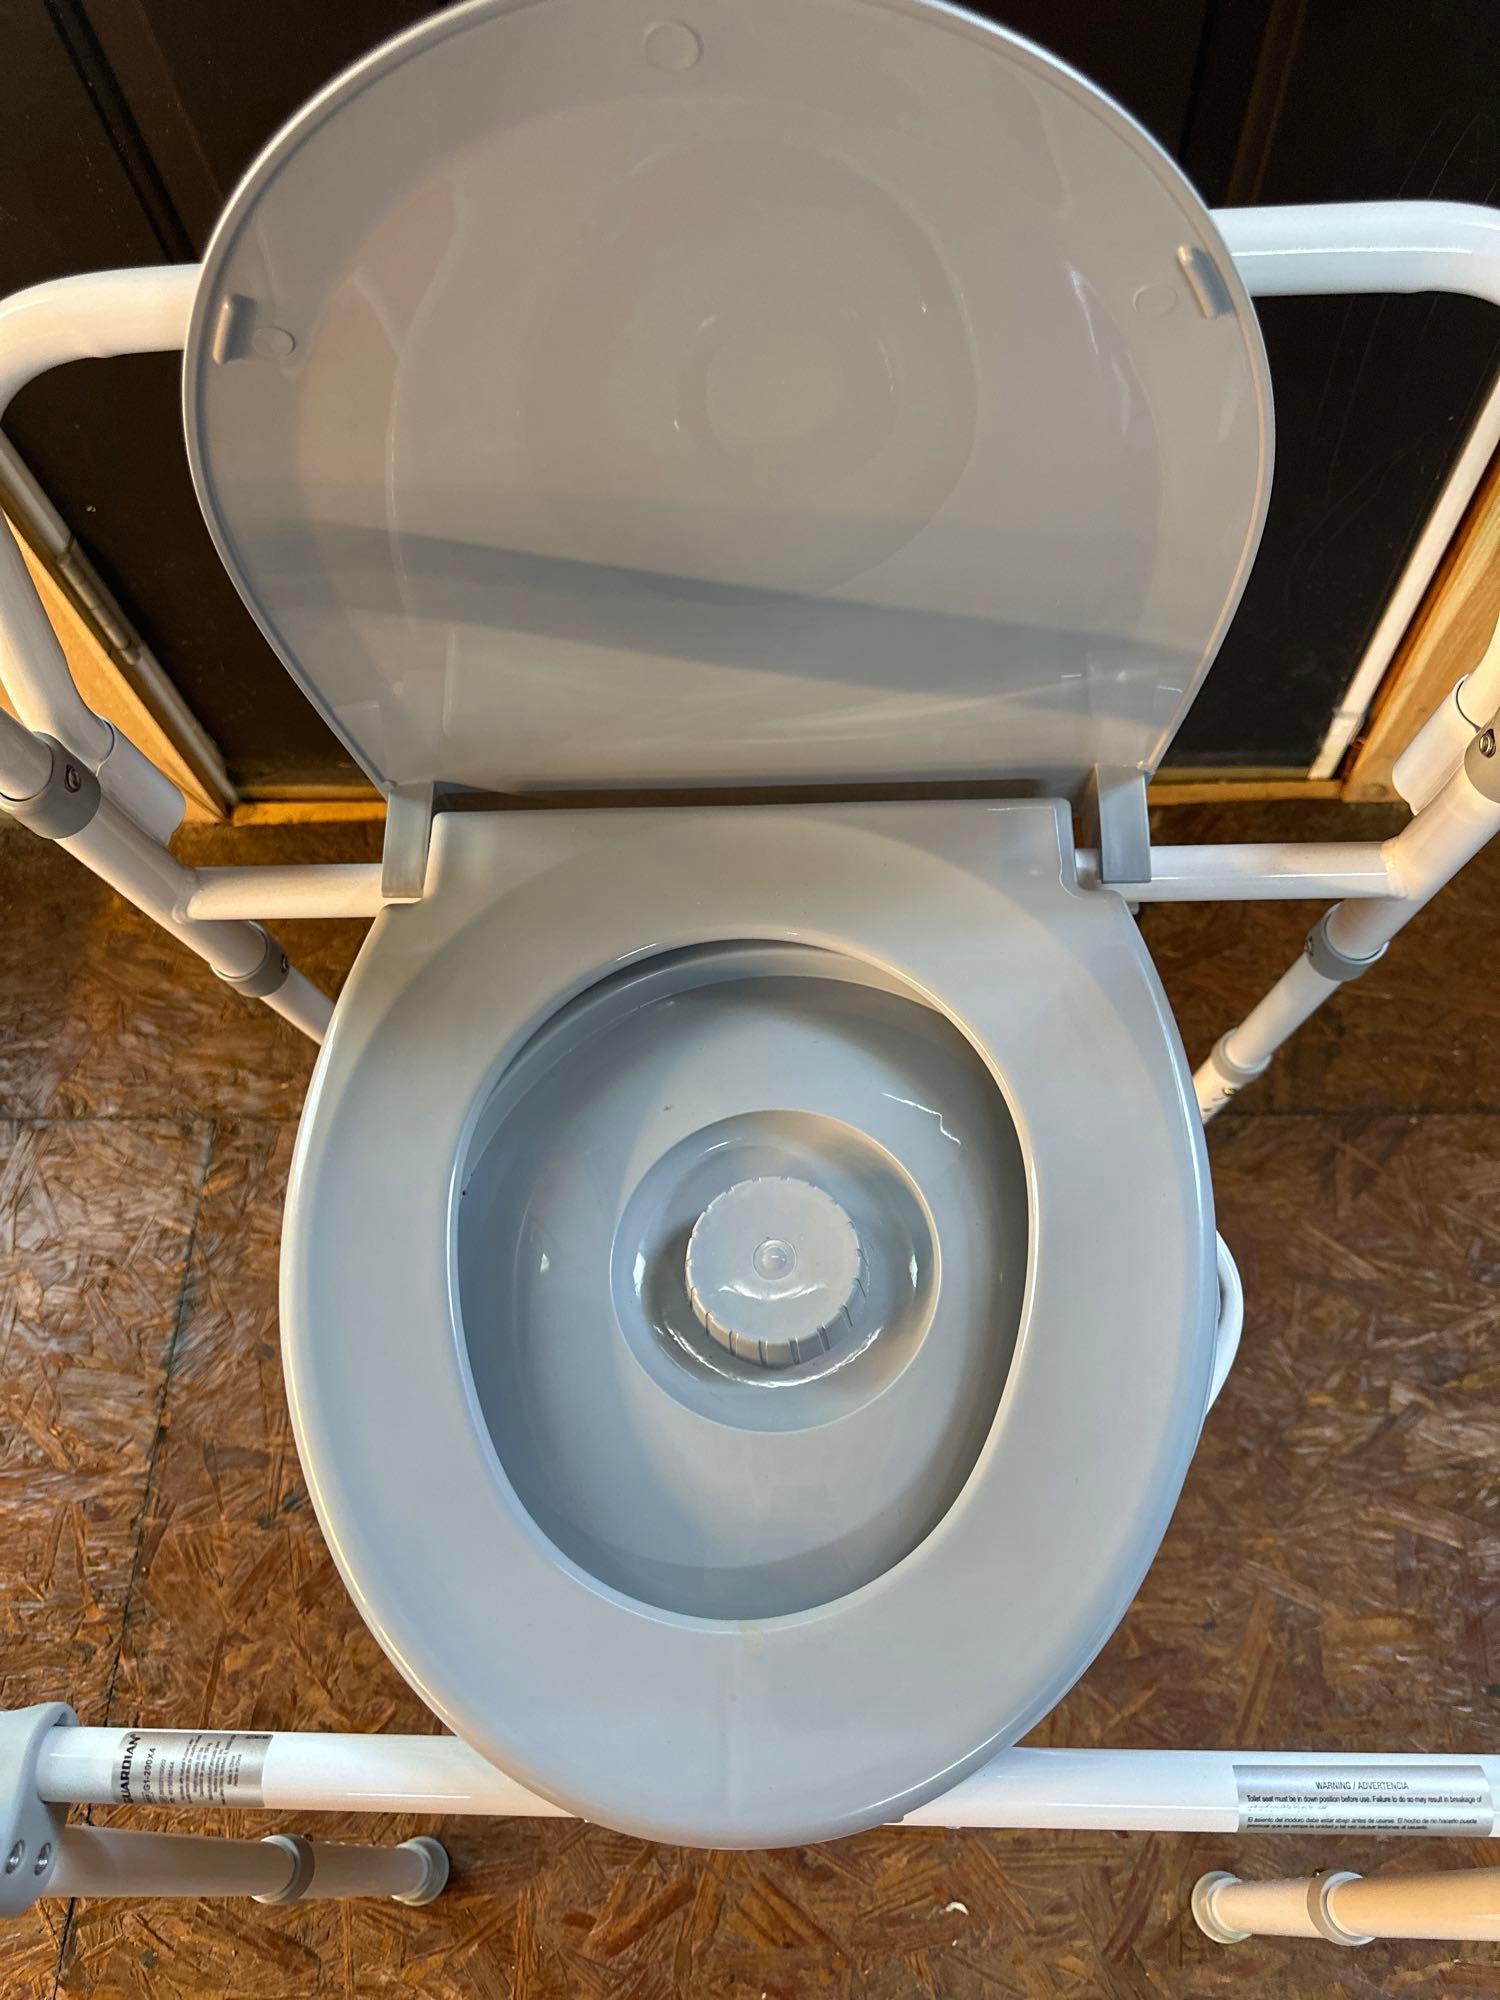 Adjustable 3 in 1 Portable Commode Over Toilet Removable Bucket Seat